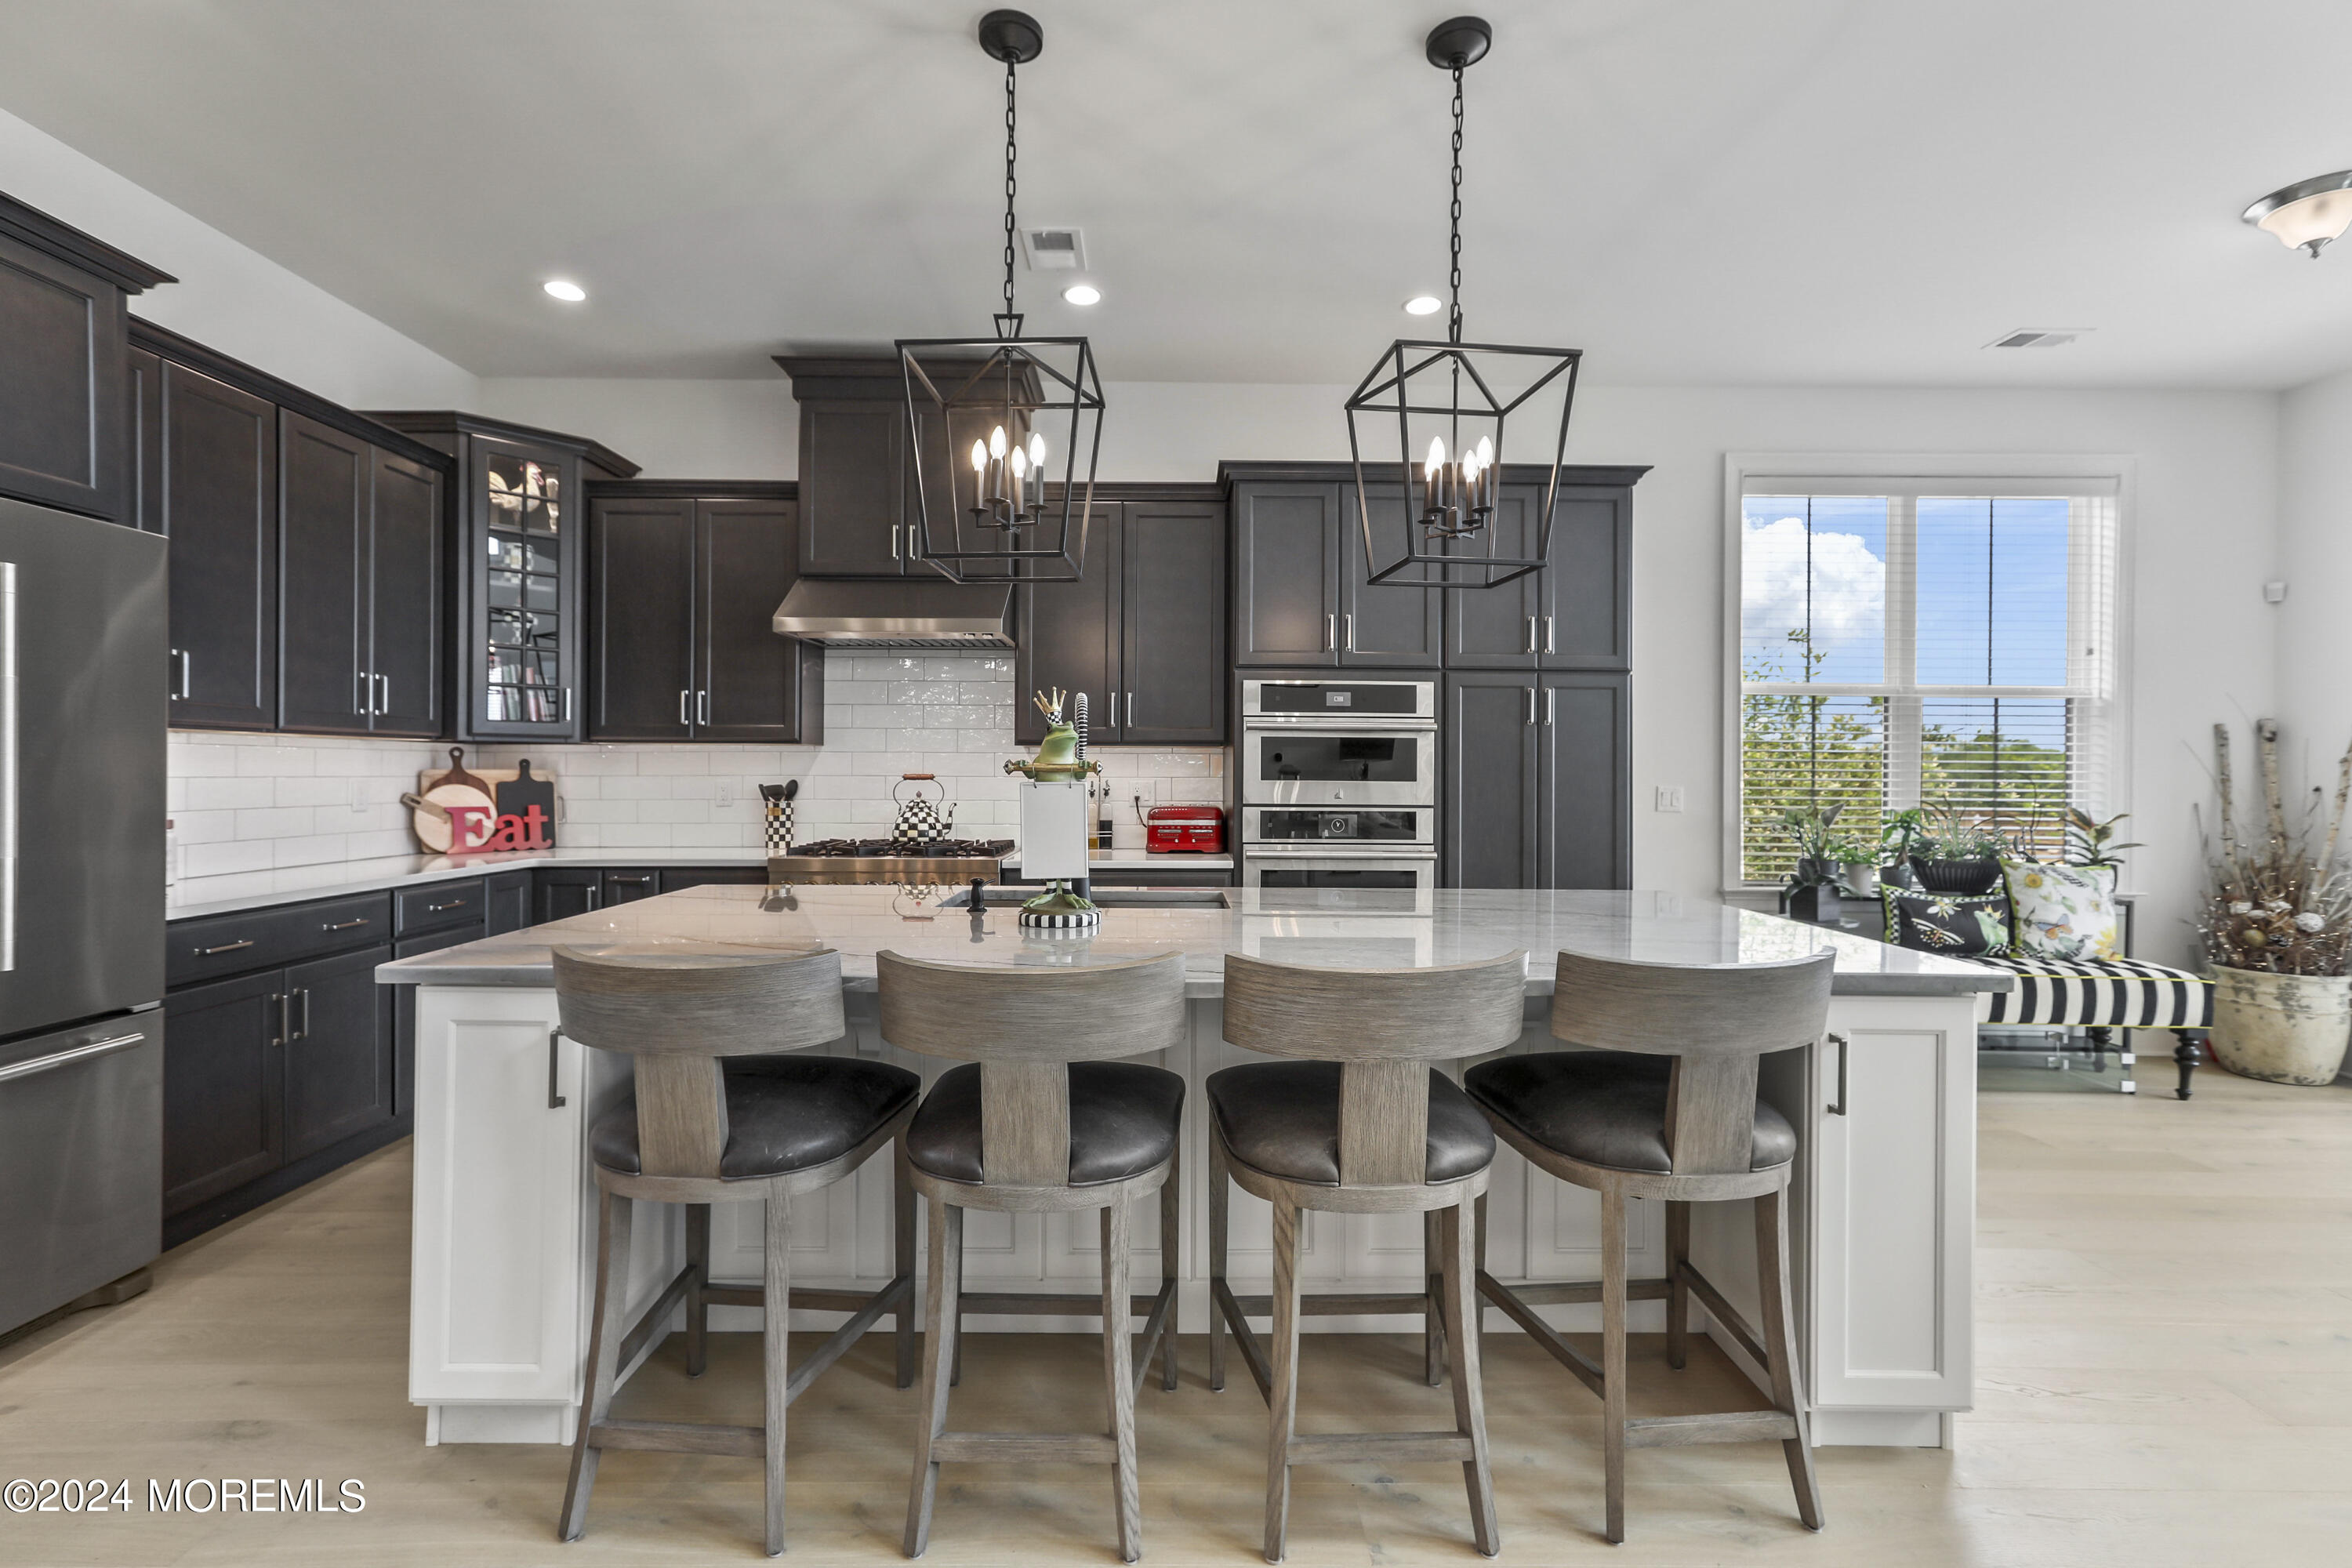 a kitchen with stainless steel appliances kitchen island granite countertop a dining table chairs and white cabinets